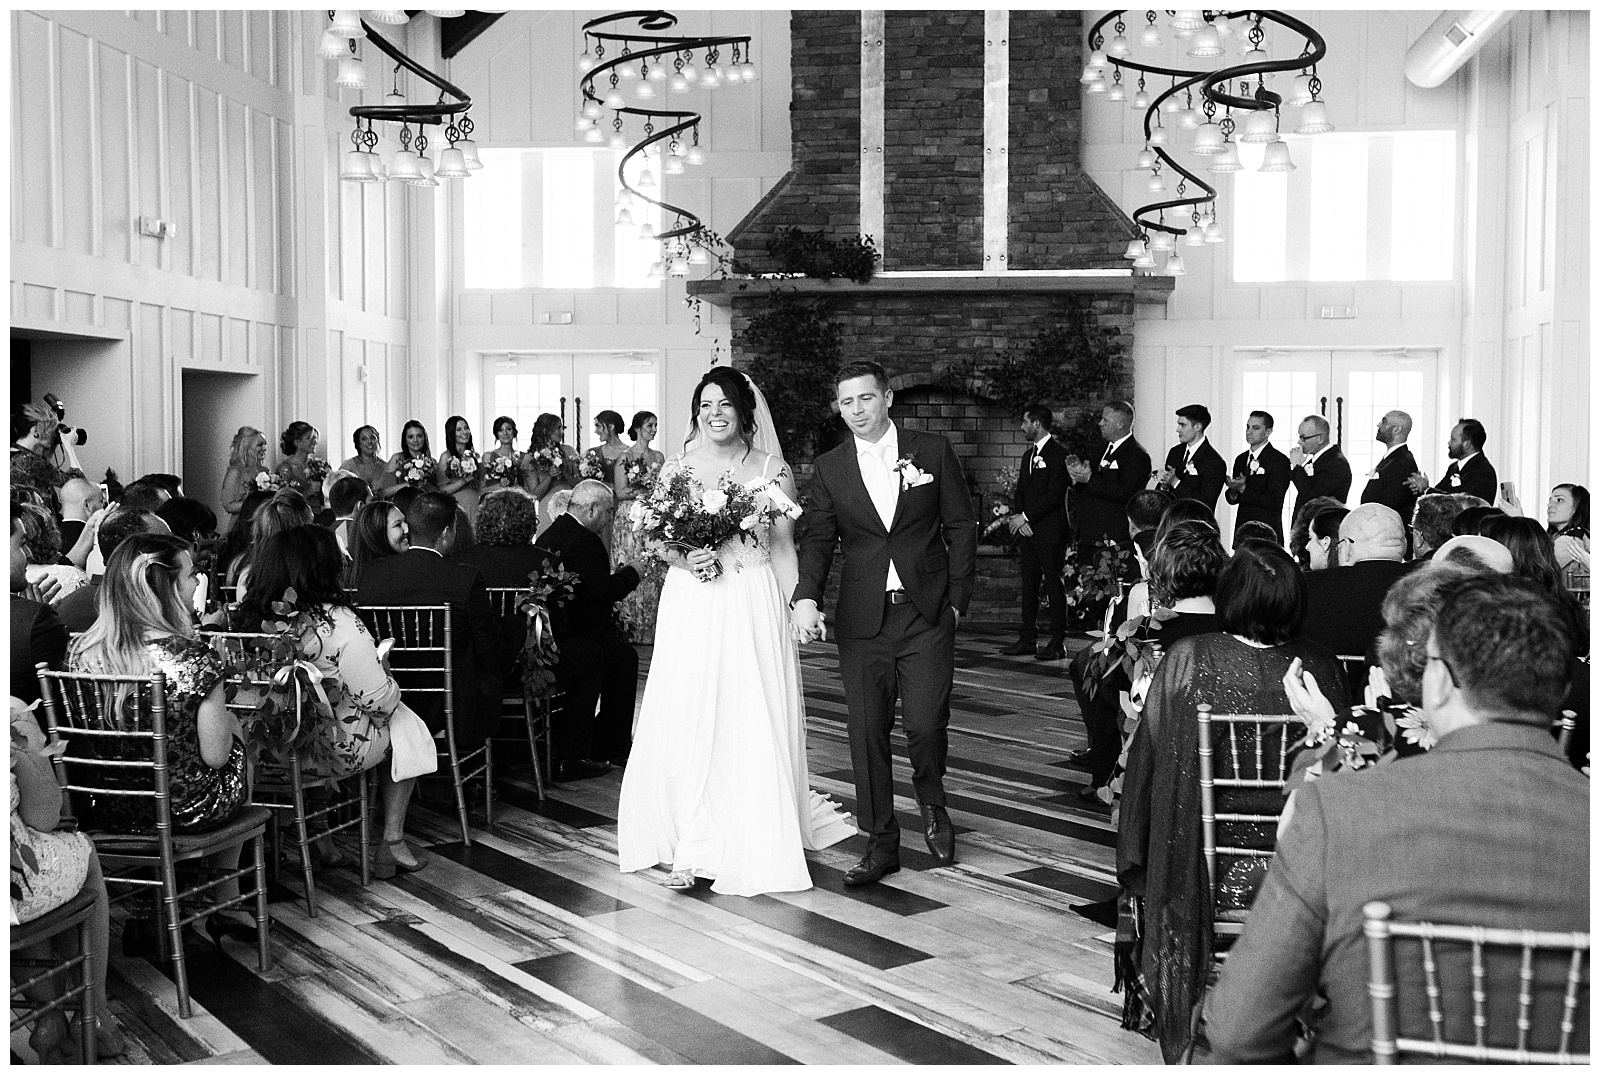 Bride and groom exit the ceremony after exchanging vows inside the Coach House at Ryland Inn.